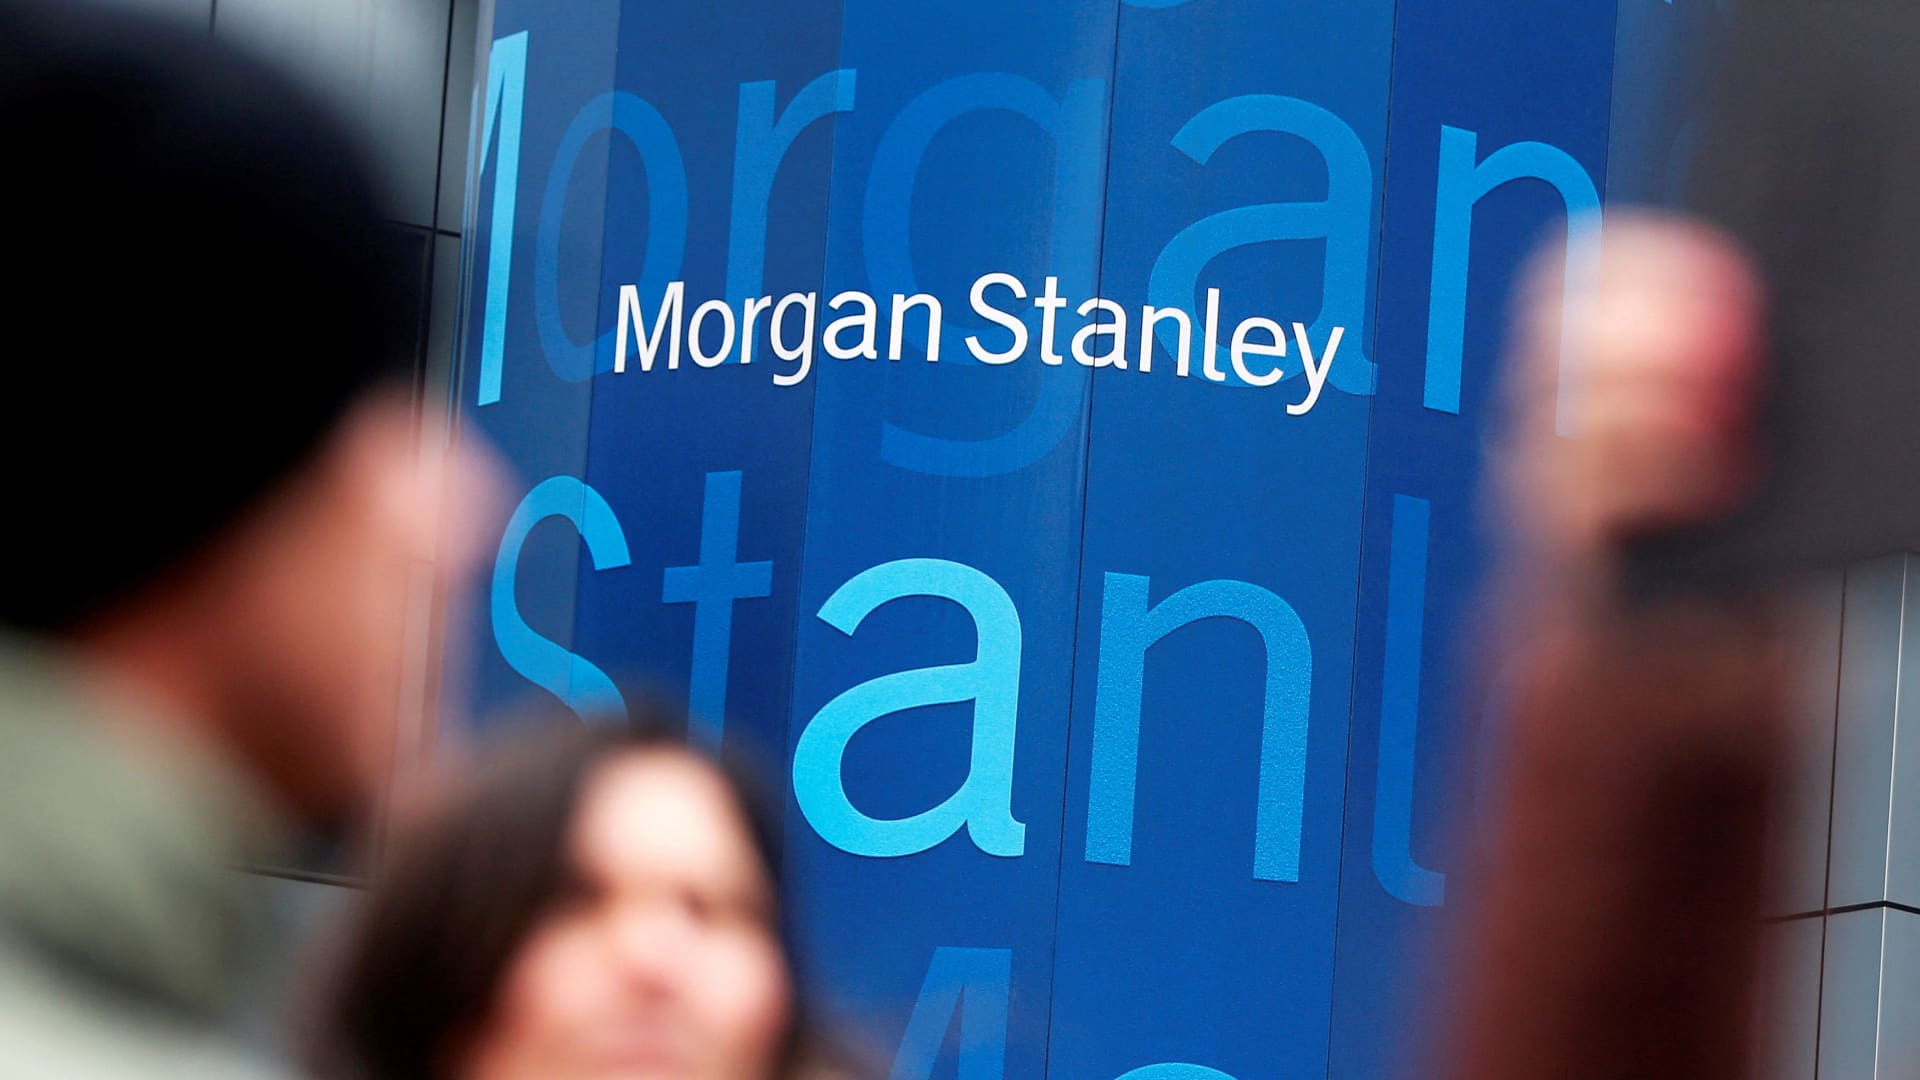 Wall Street is cutting more jobs as Morgan Stanley plans 3,000 layoffs